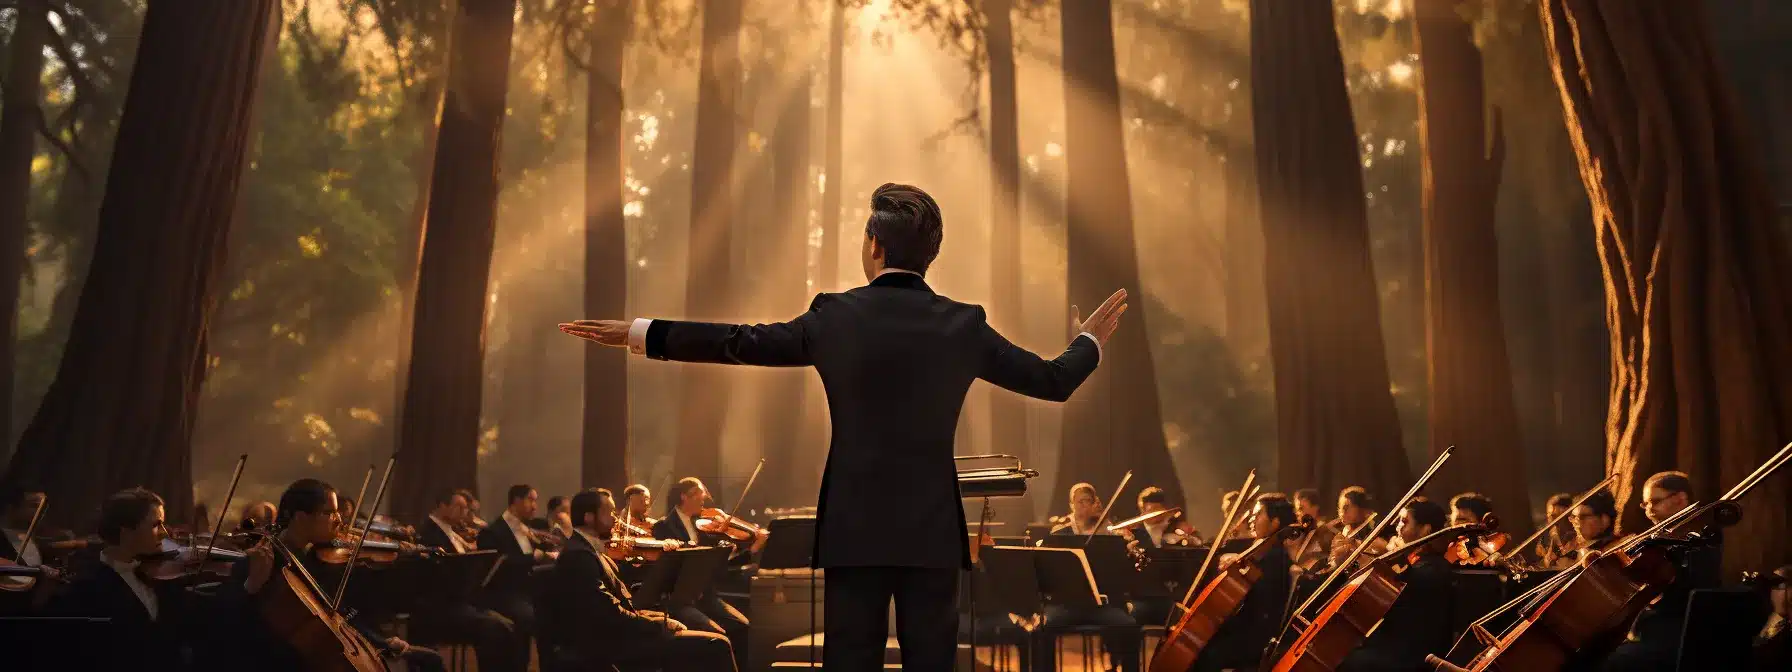 A Symphony Orchesta Playing Together With A Sequoia Tree In The Background.